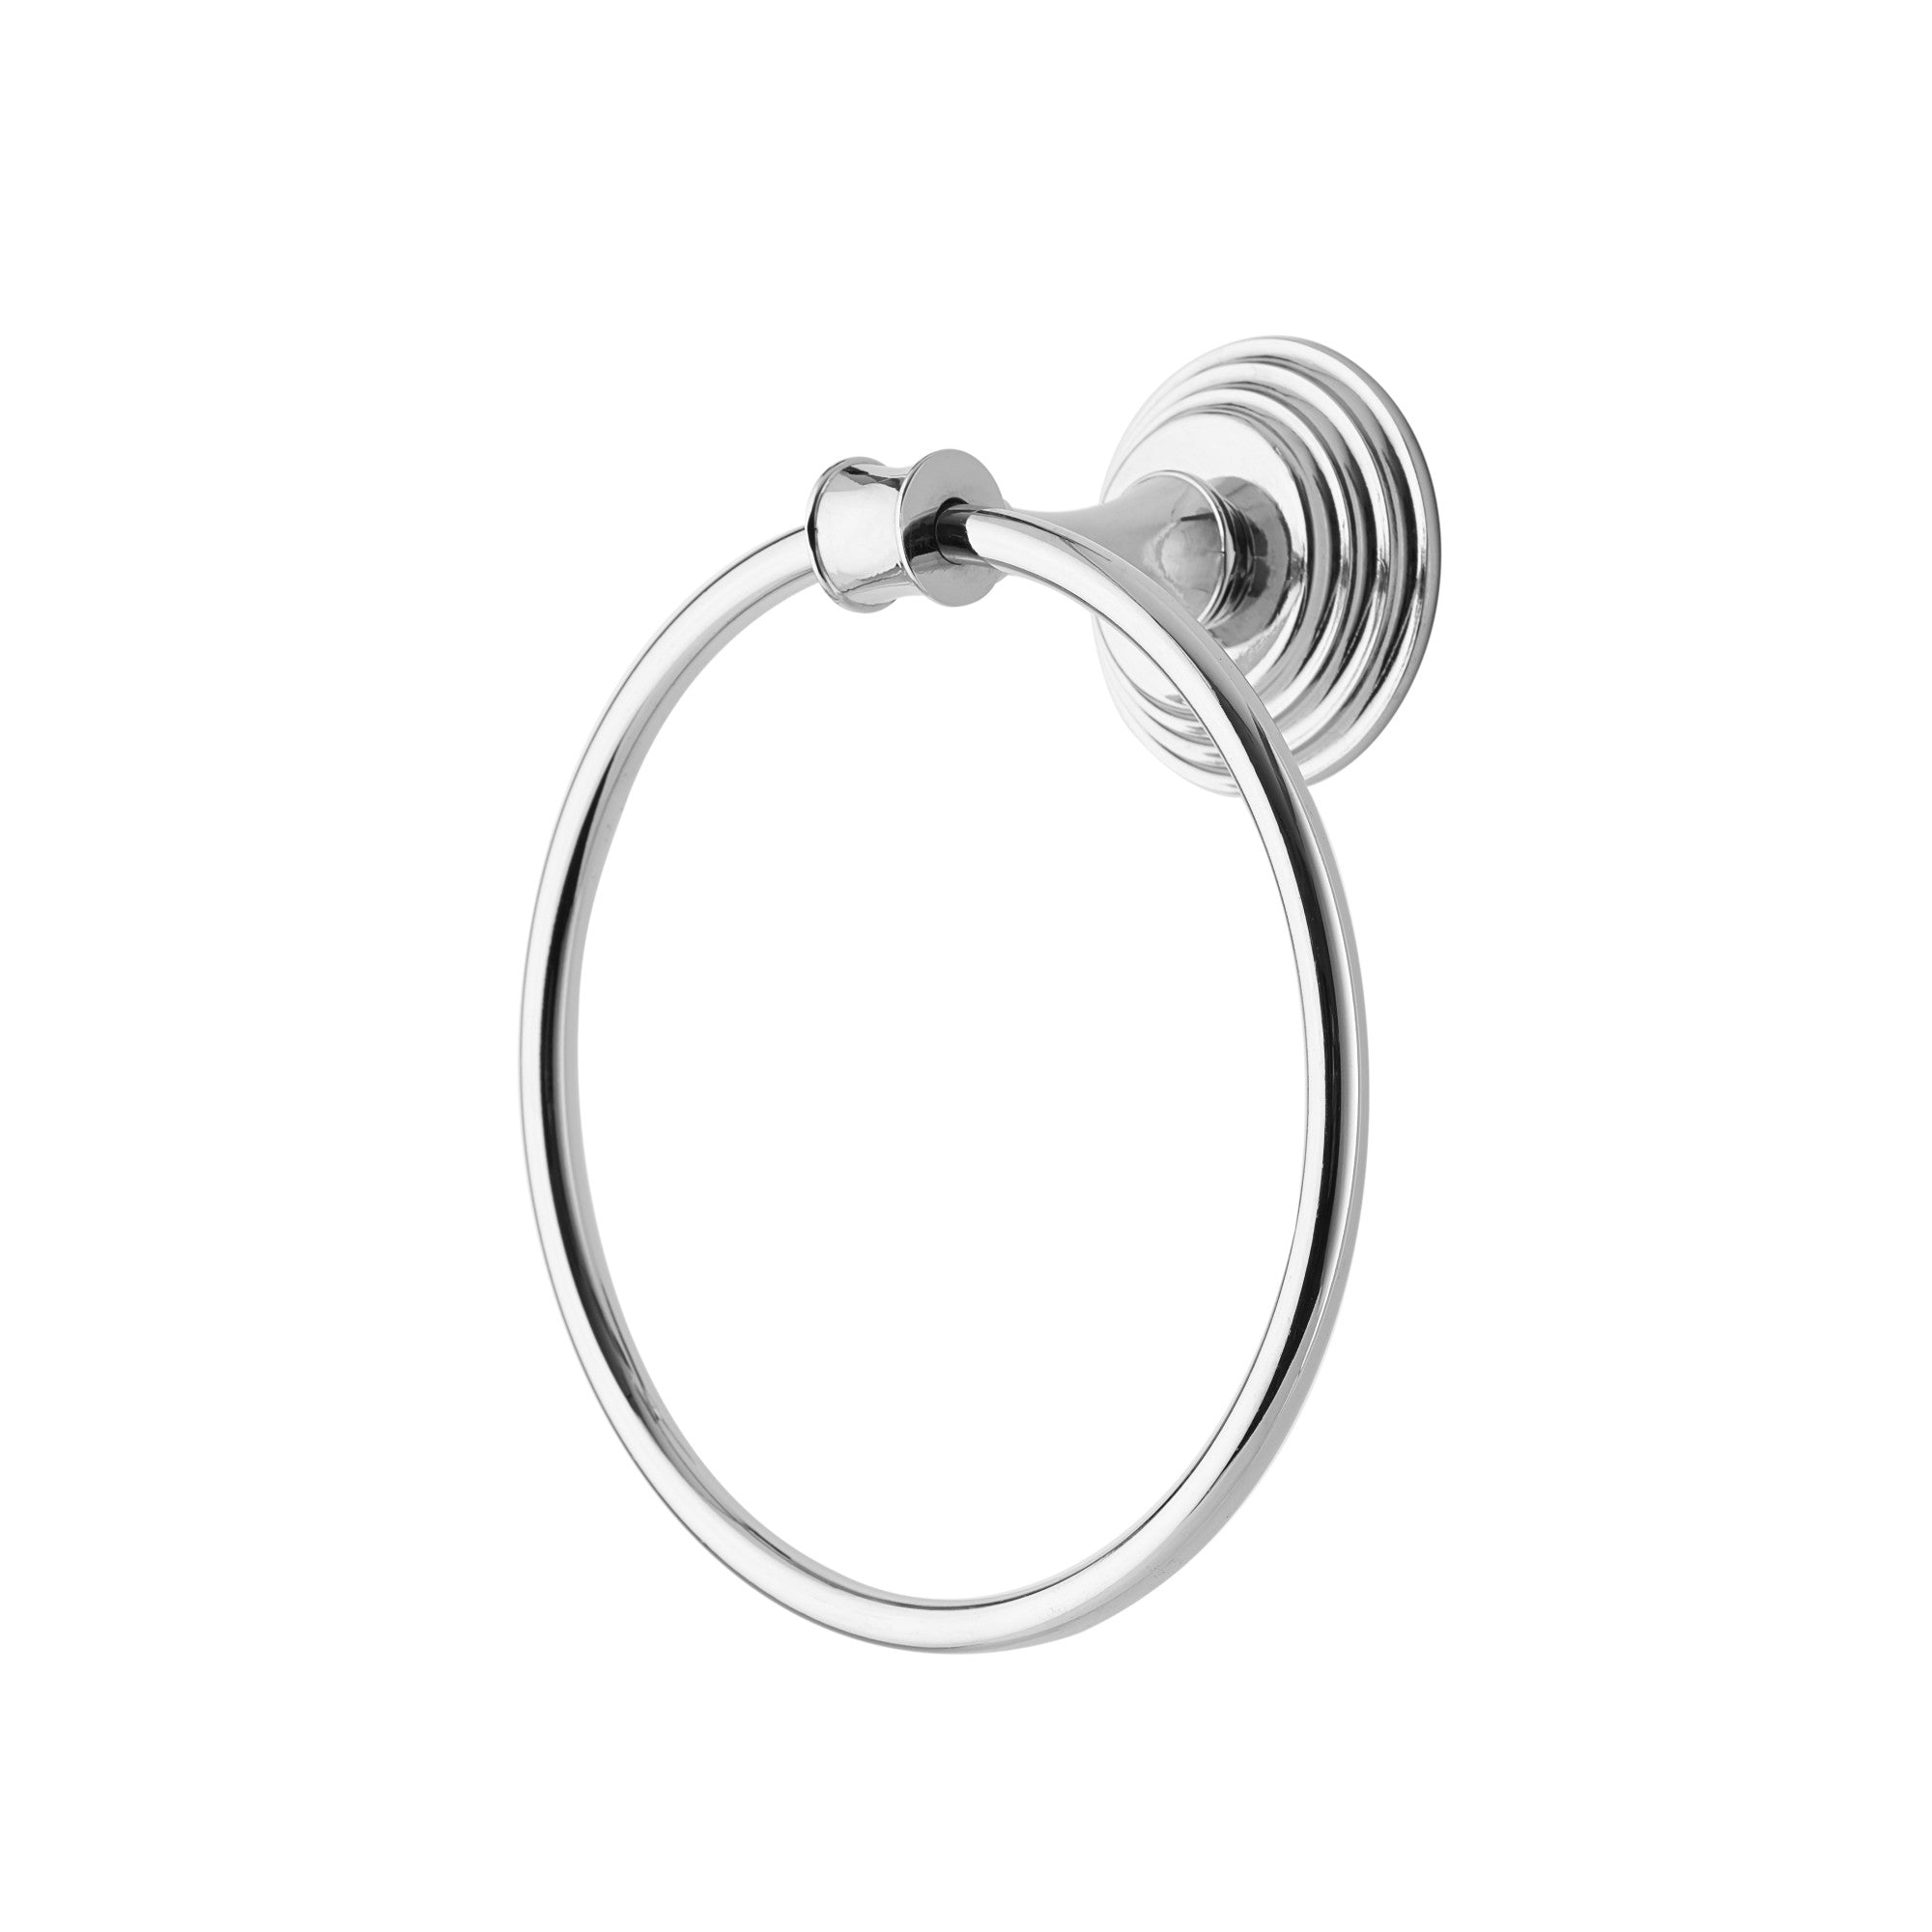 Teamson Home Wall Mounted Towel Ring, Chrome